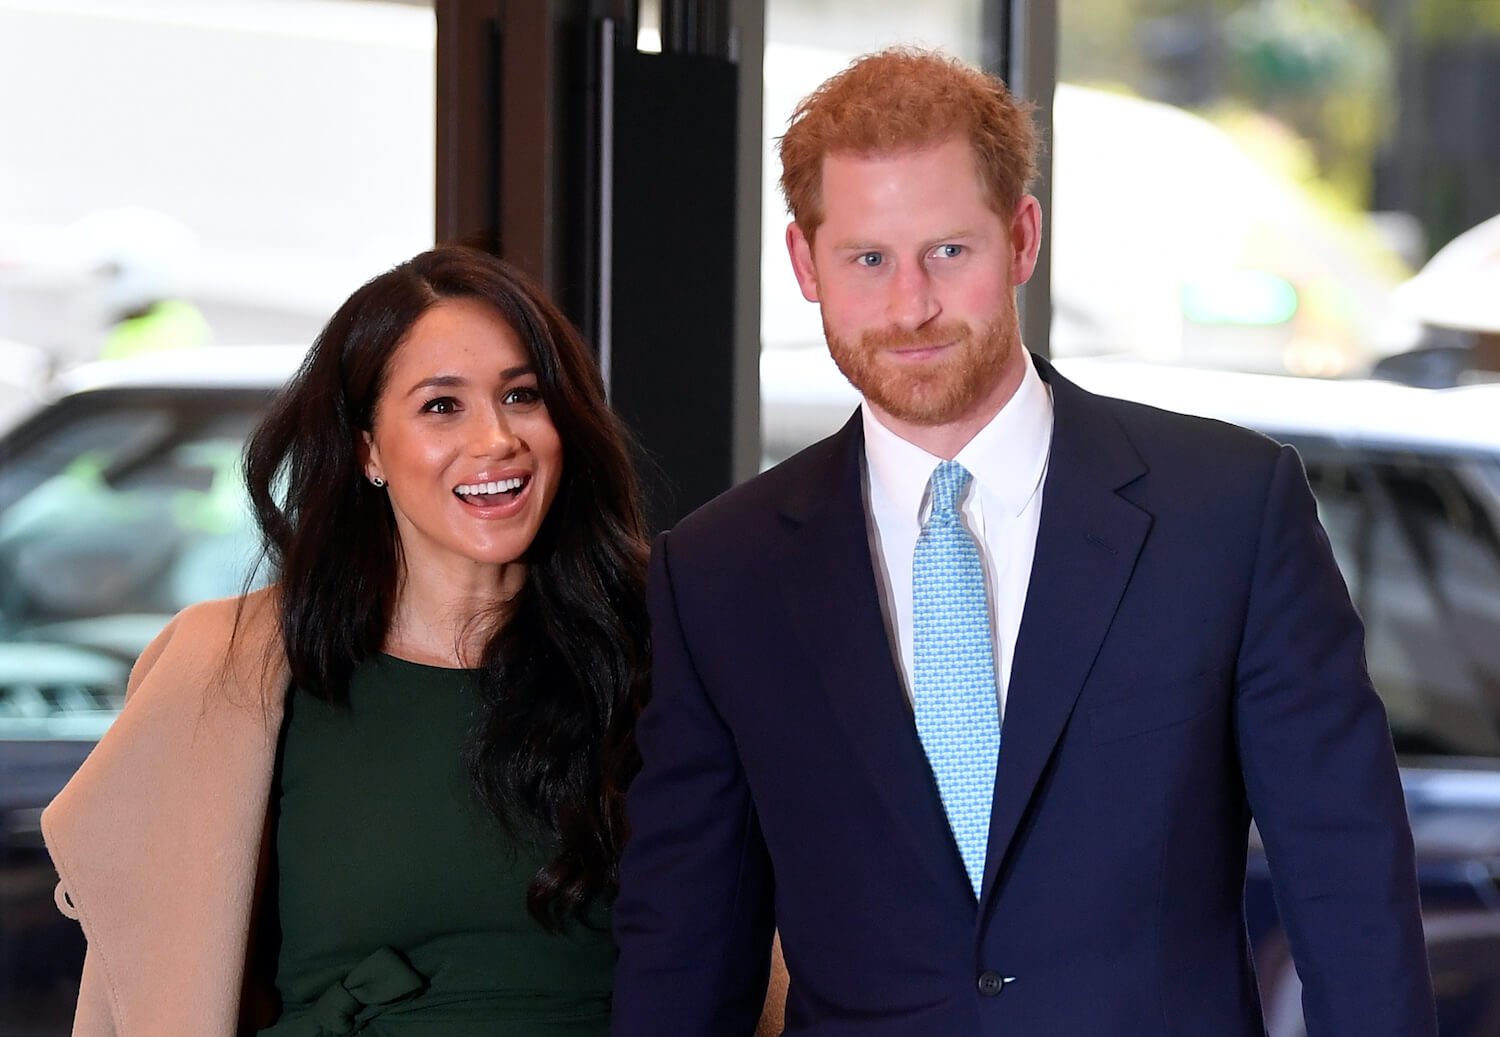 Meghan Markle smiles while wearing a green dress and tan coat alongside Prince Harry, dressed in a suit, looking off to the side